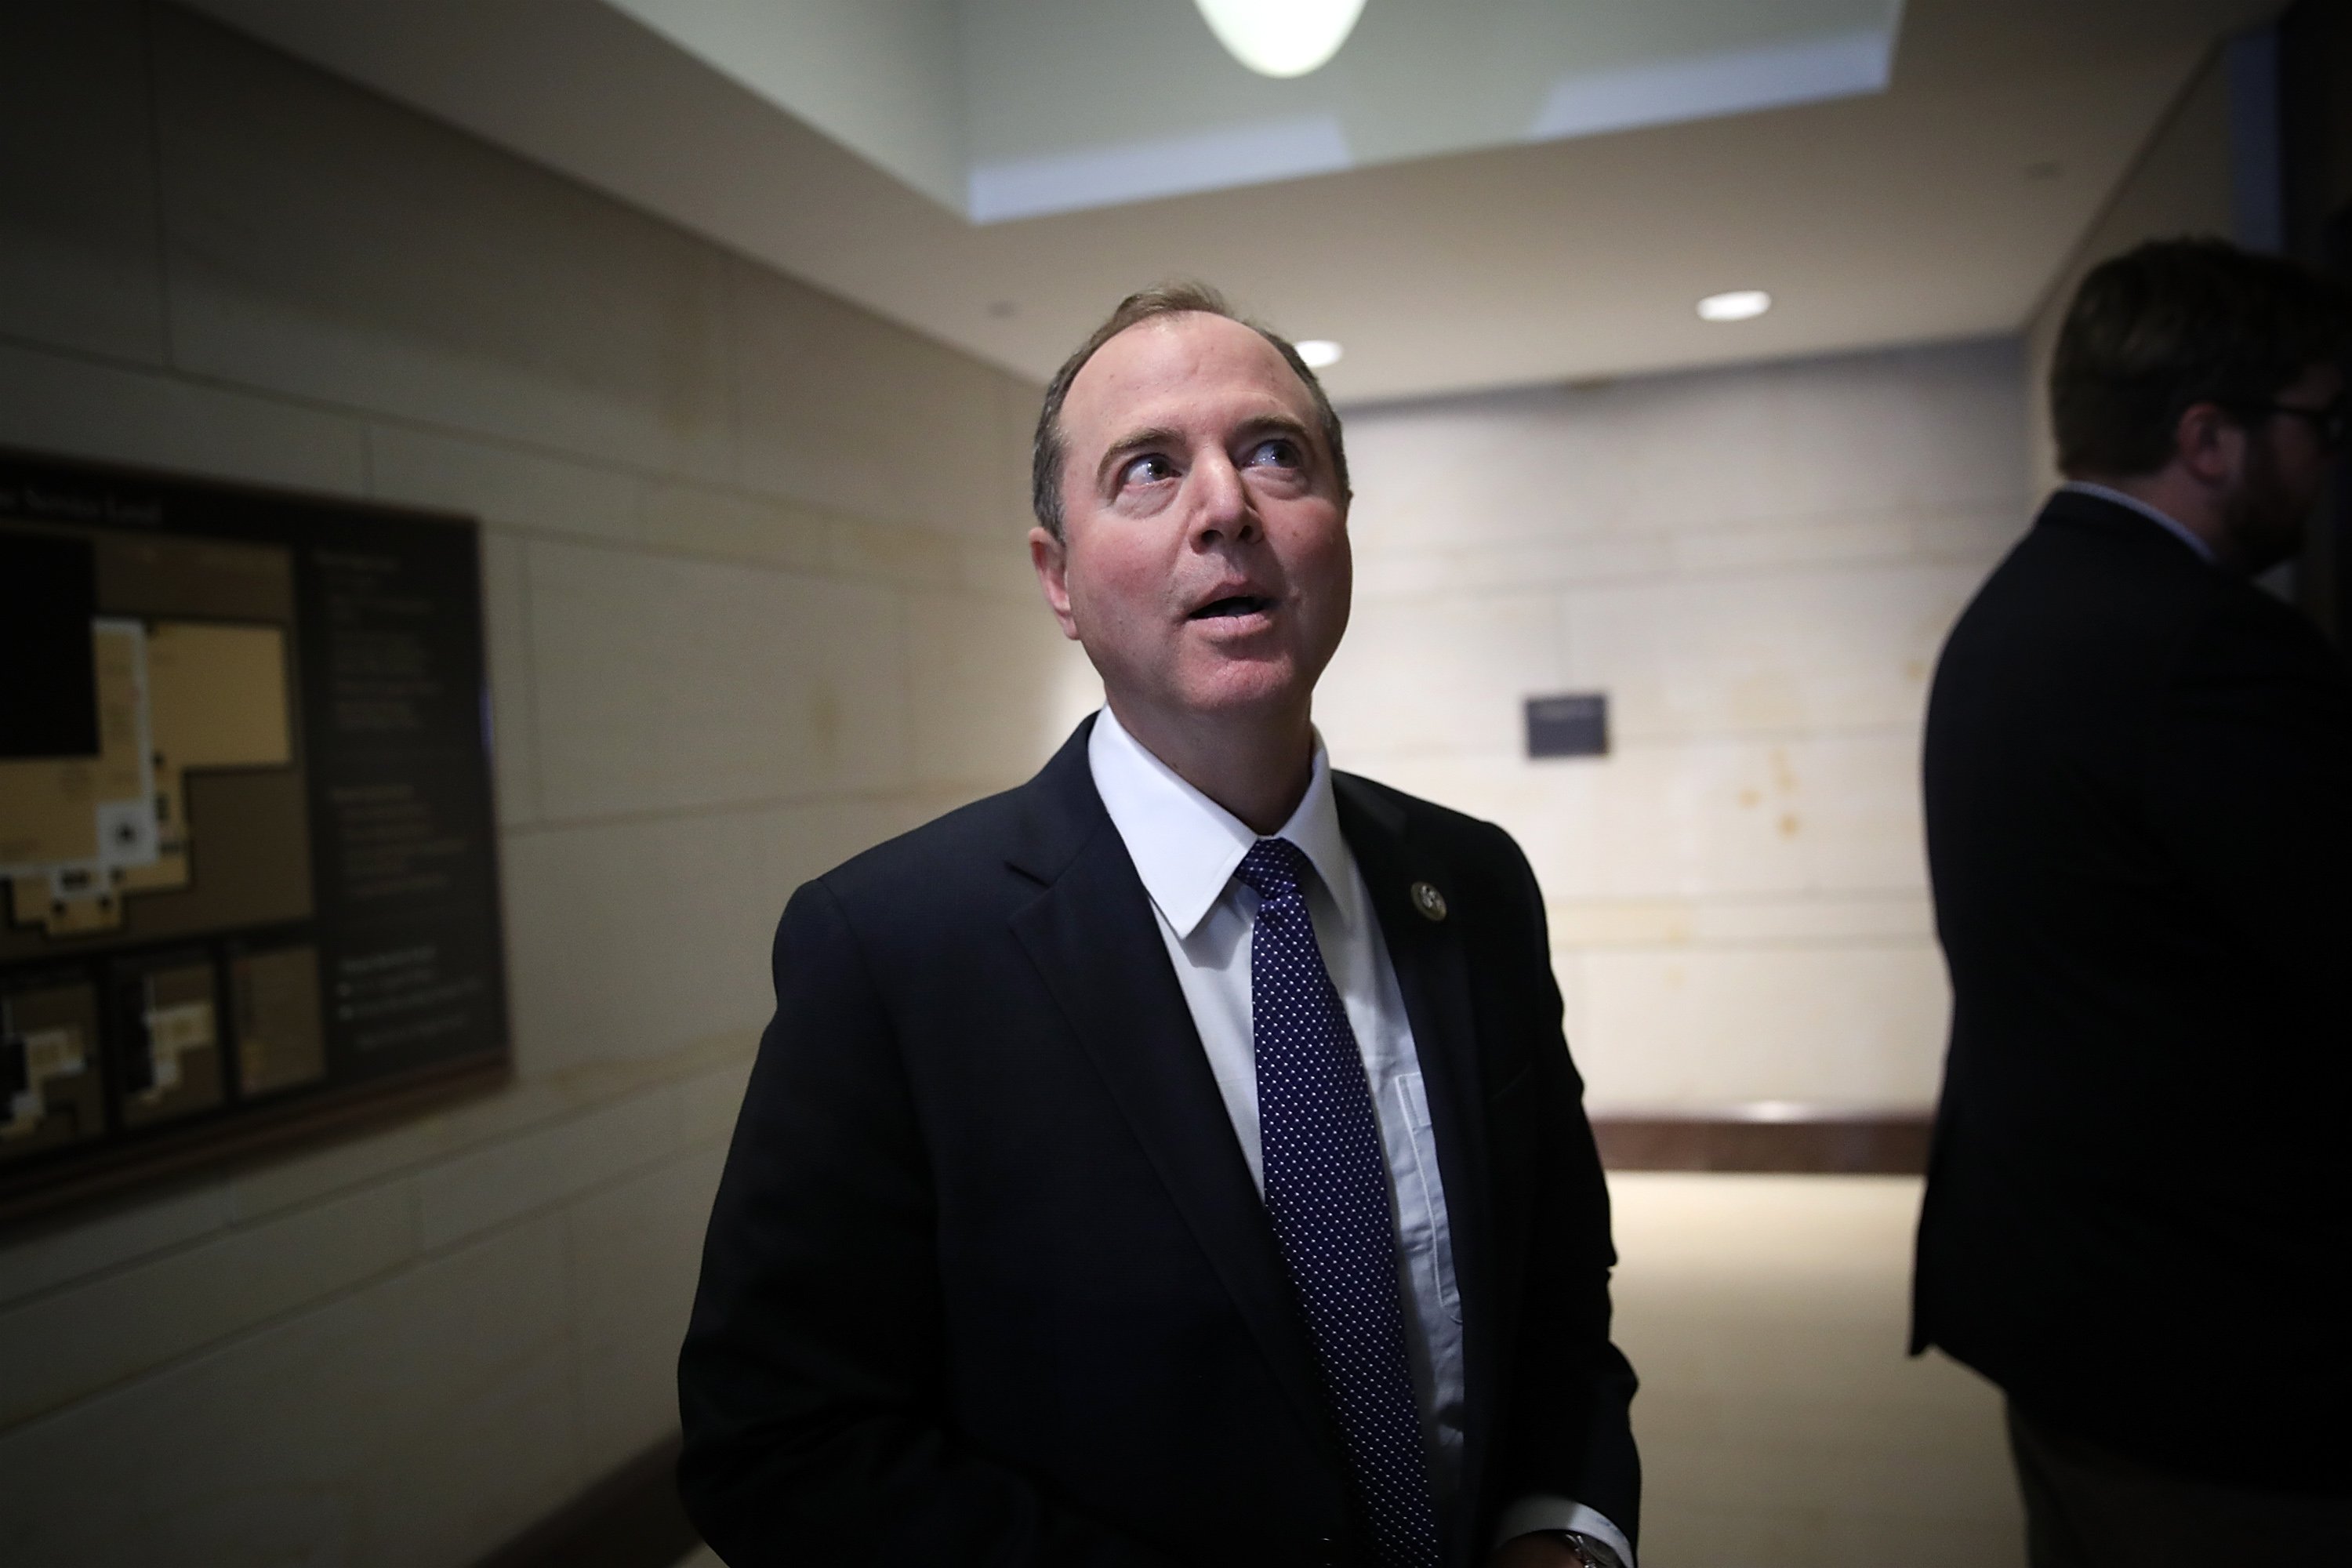 WASHINGTON, DC - FEBRUARY 05: Rep. Adam Schiff (D-CA), ranking member of the House Permanent Select Committee on Intelligence, answers brief questions from the media while boarding an elevator at the U.S. Capitol February 5, 2018 in Washington, DC. The House Permanent Select Committee on Intelligence is scheduled to meet later today to vote on the release of the minority rebuttal of a memo released last week by their Republican counterparts relating the committeeÕs investigation of Russian influence in the 2016 U.S. presidential election. (Photo by Win McNamee/Getty Images)